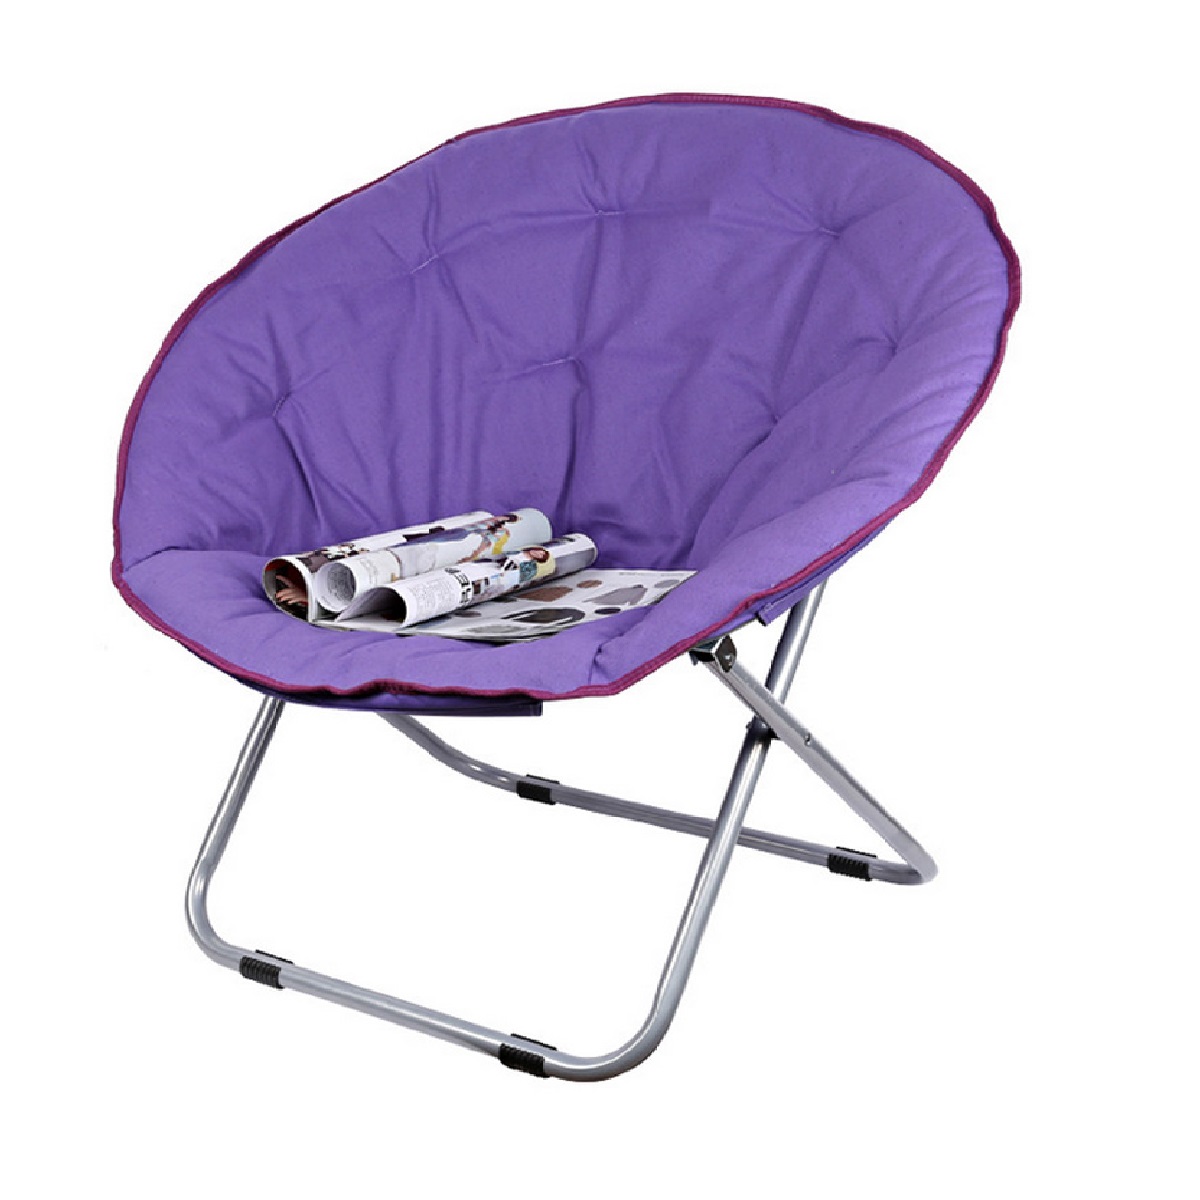 Saucer Chair, Folding Camping Chair Large Dorm Living Room Bedroom Garden Lounge Chair Removable Plush Seat Cushion Moon Saucer Chair Heavy Duty Round Beach Sofa Chair - image 3 of 6